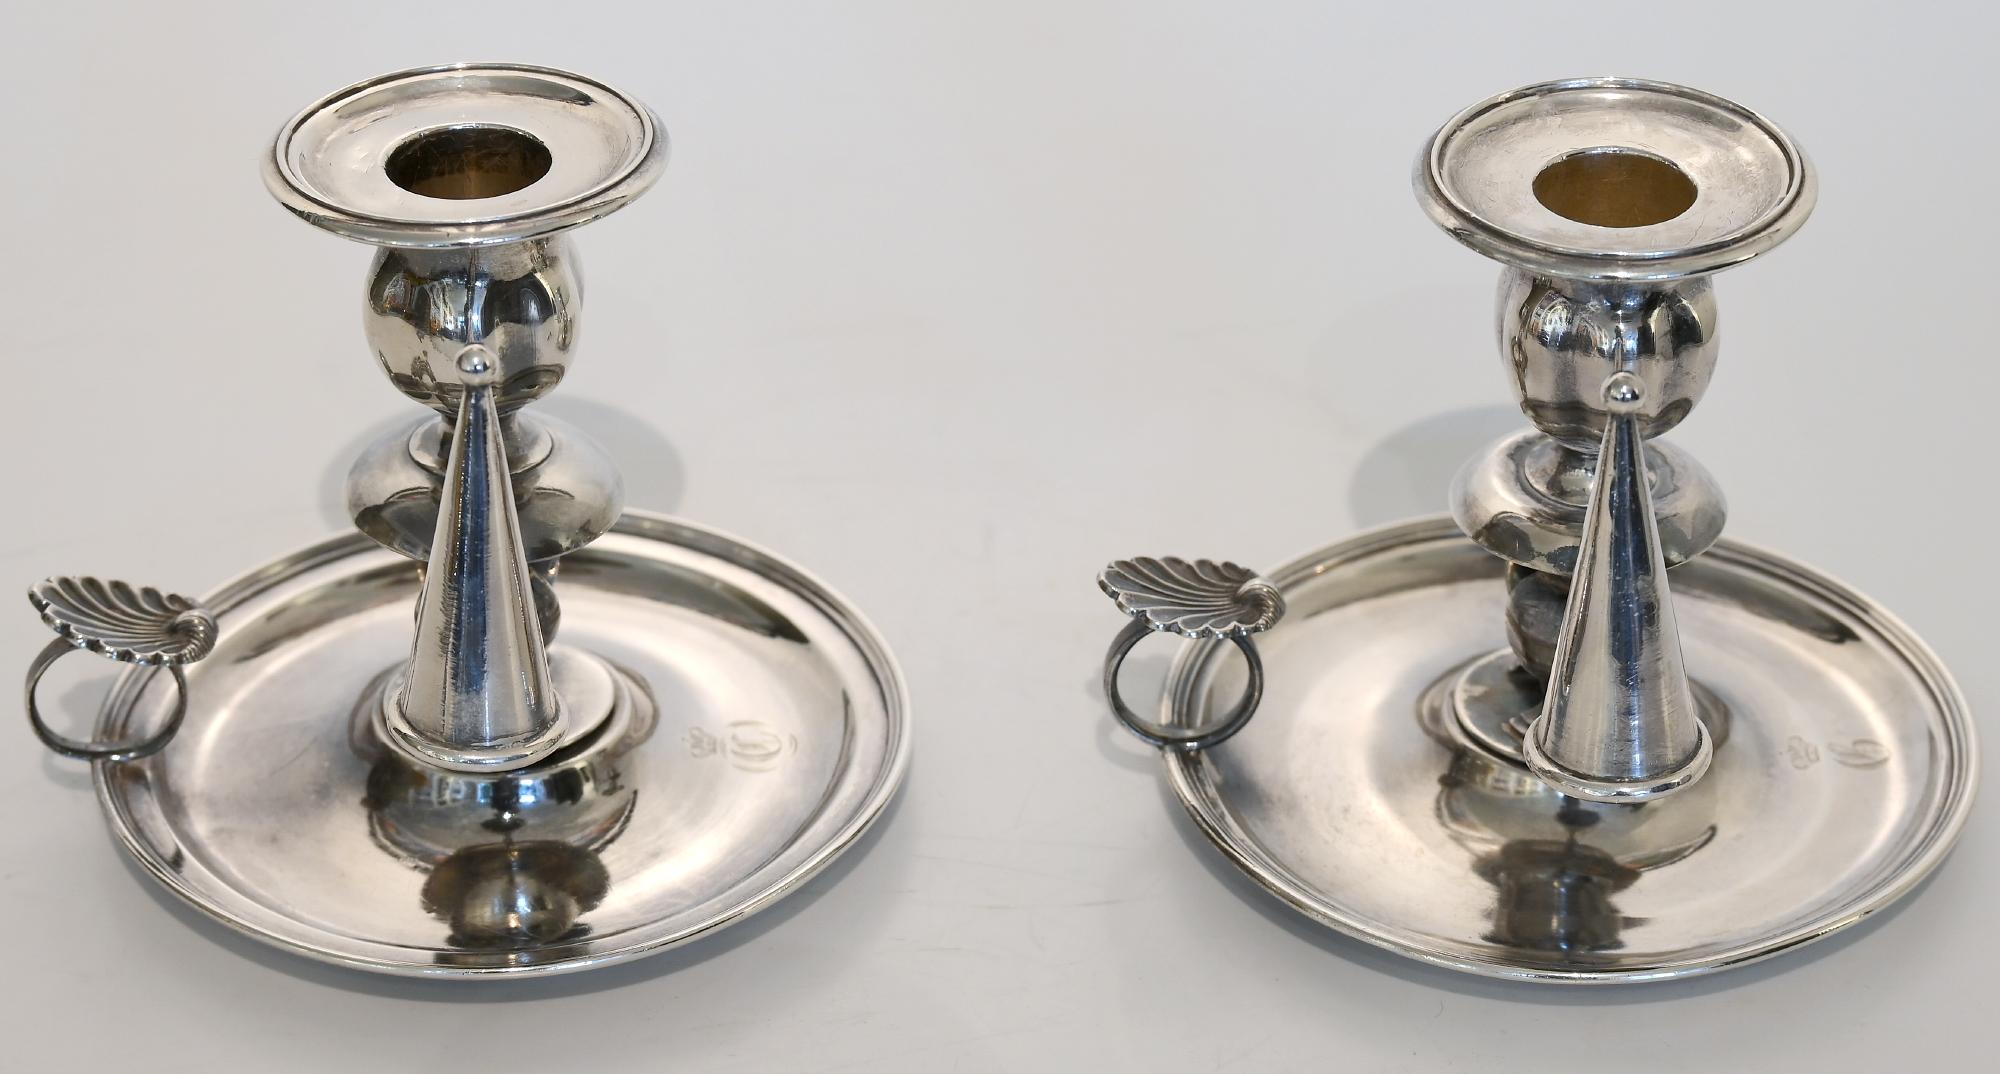 Pair of candlesticks, St. Petersburg Russia, dated 1854, with fire hat, makersmark, hallmark and monogram C T under crown from a noble family
the weight of the candlesticks are together 580 g silver.